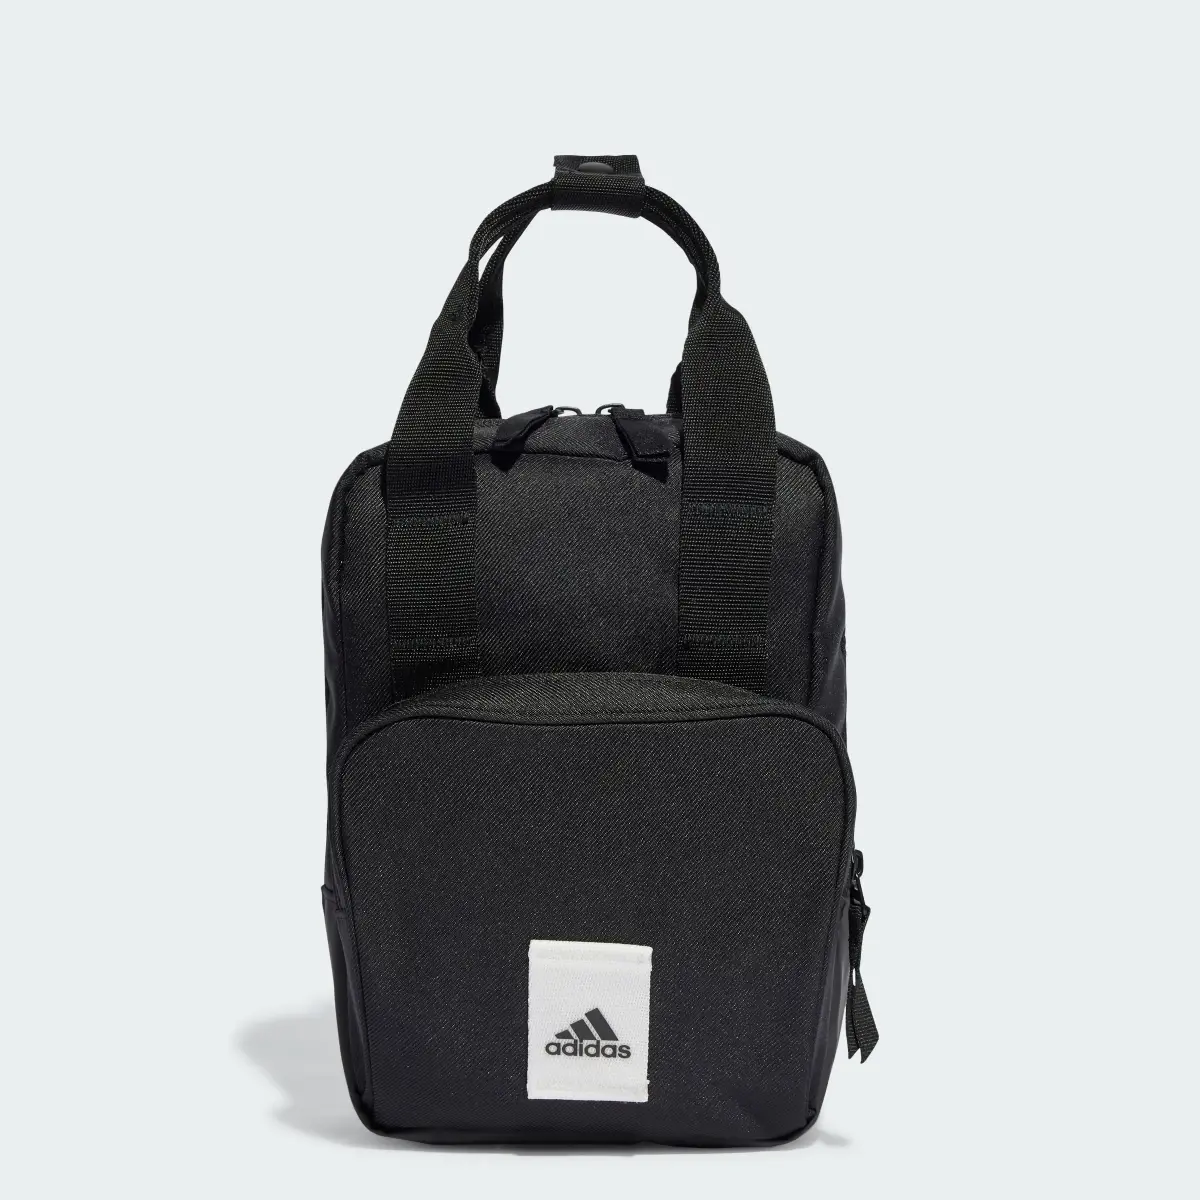 Adidas Prime Backpack Extra Small. 1